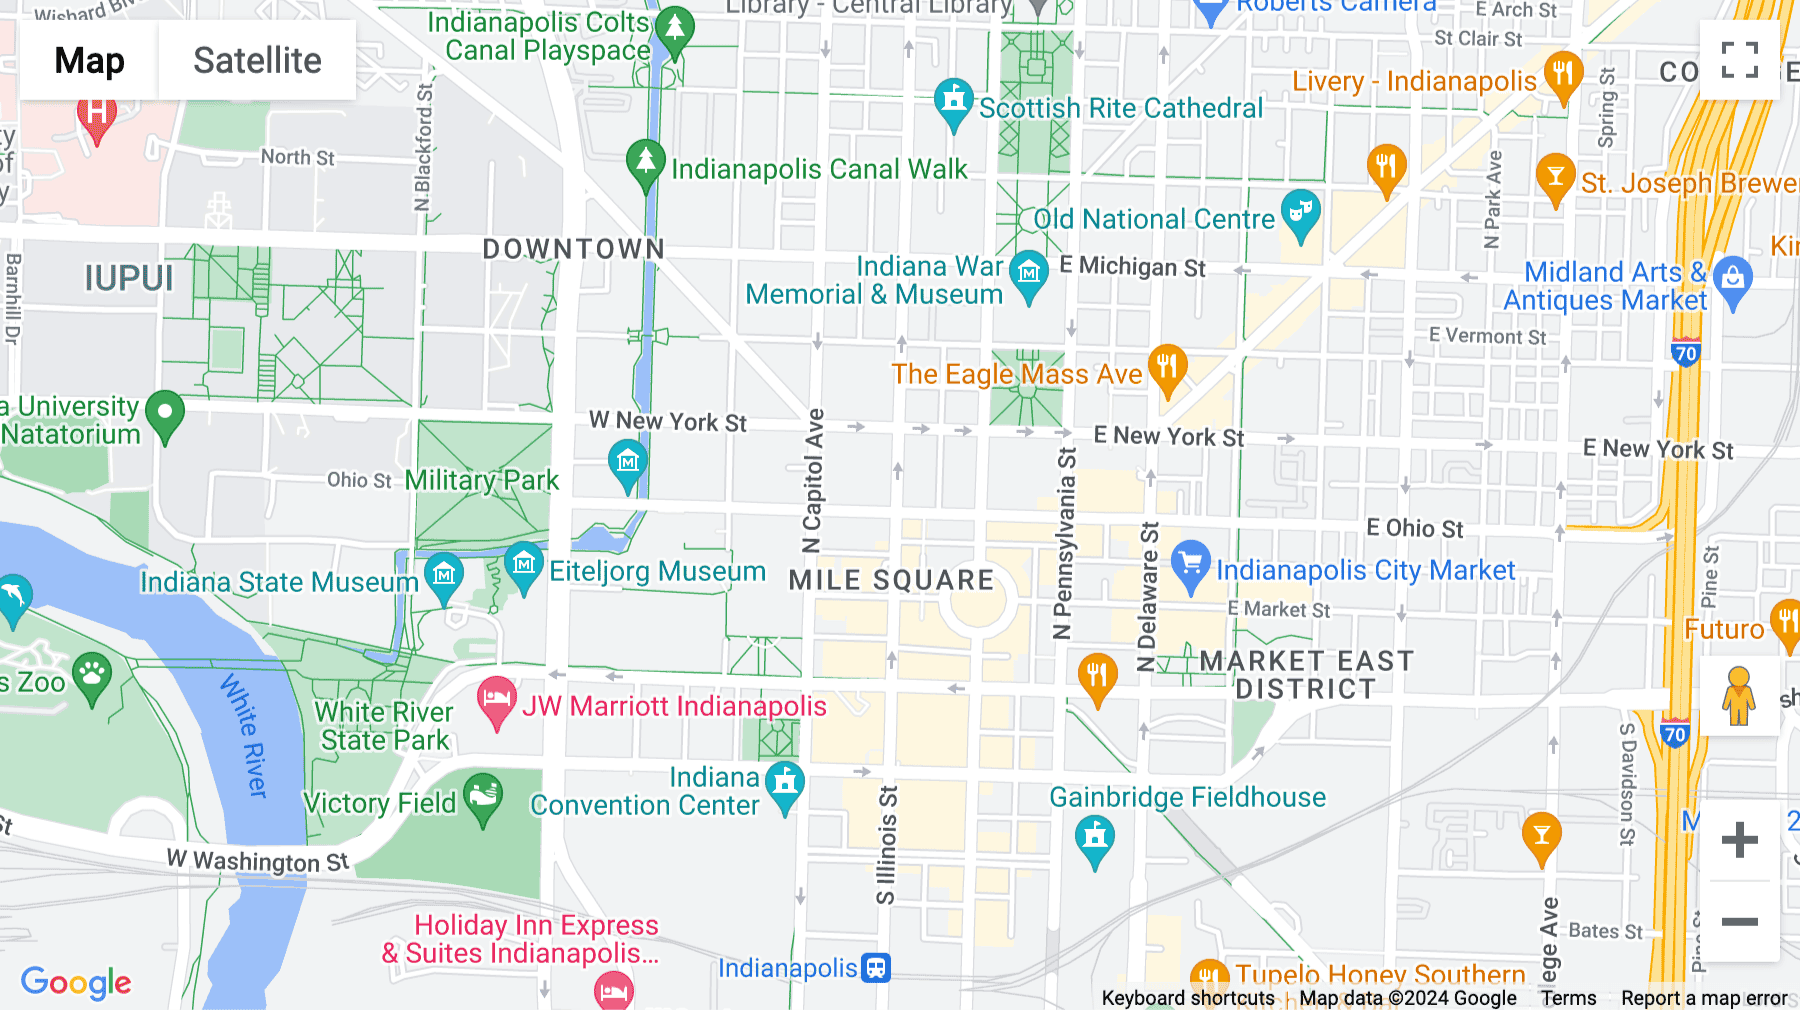 Click for interative map of 201 North Illinois Street, Suite 1600-South Tower, Indianapolis, Indiana, USA, Indianapolis